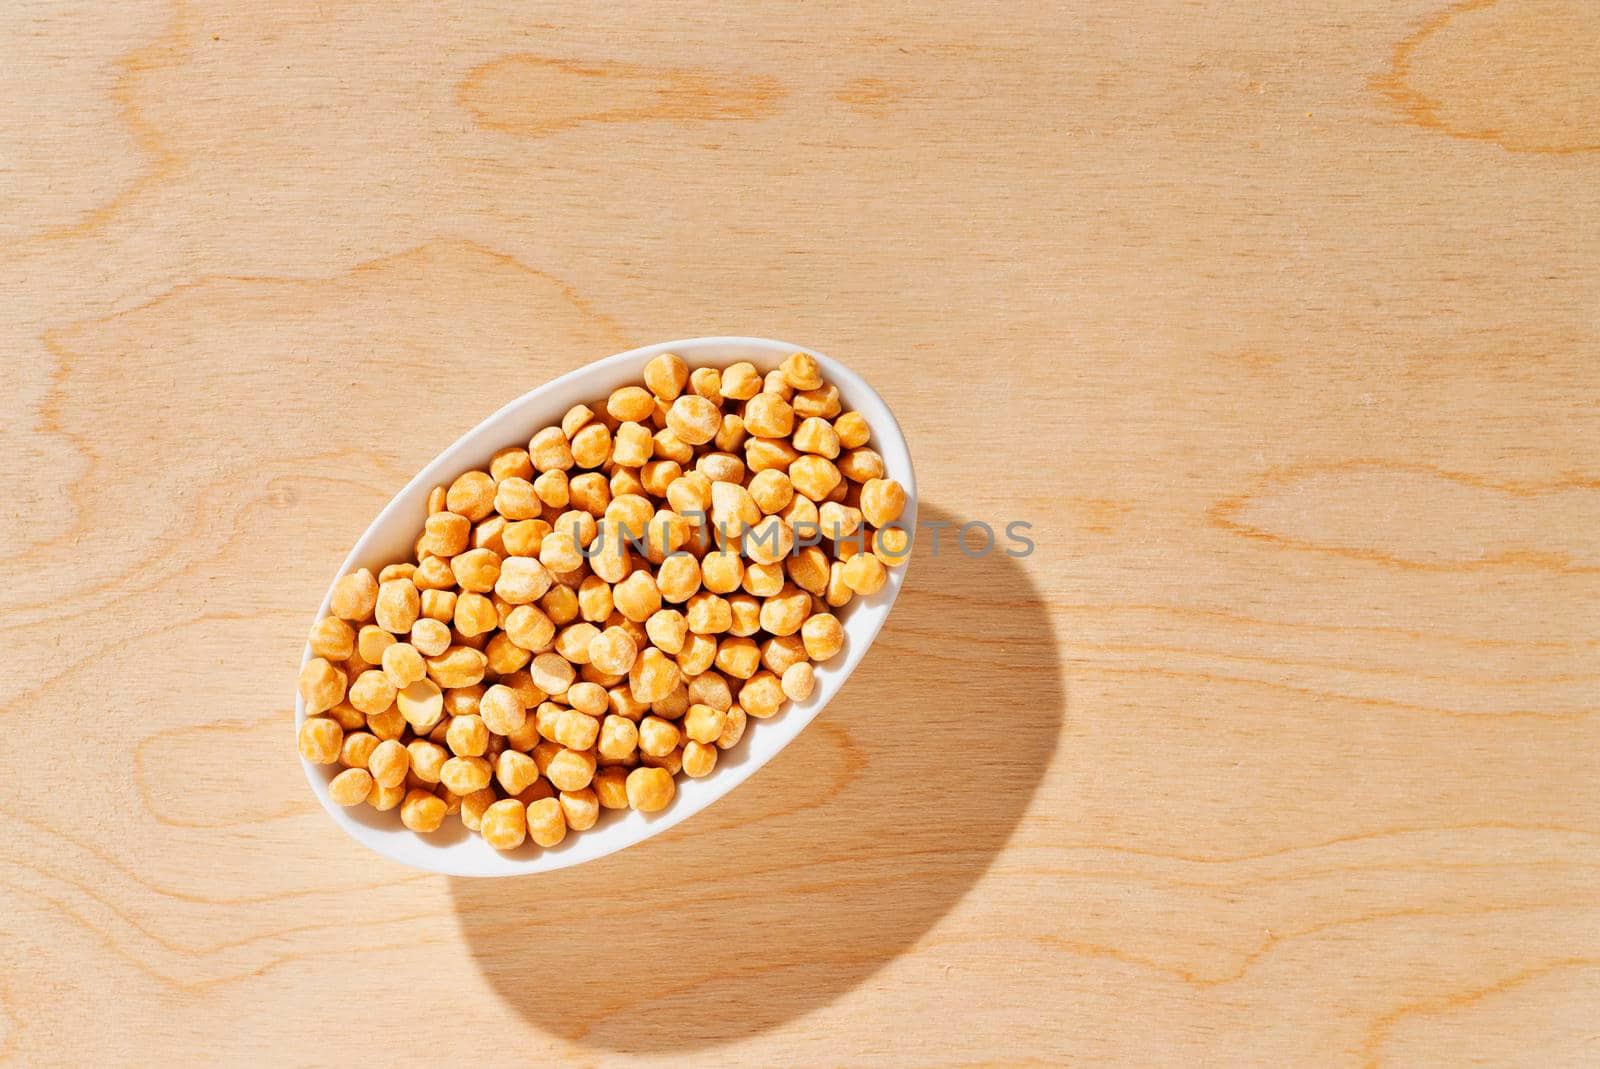 Top view of dried chickpeas in white bowl on wooden background